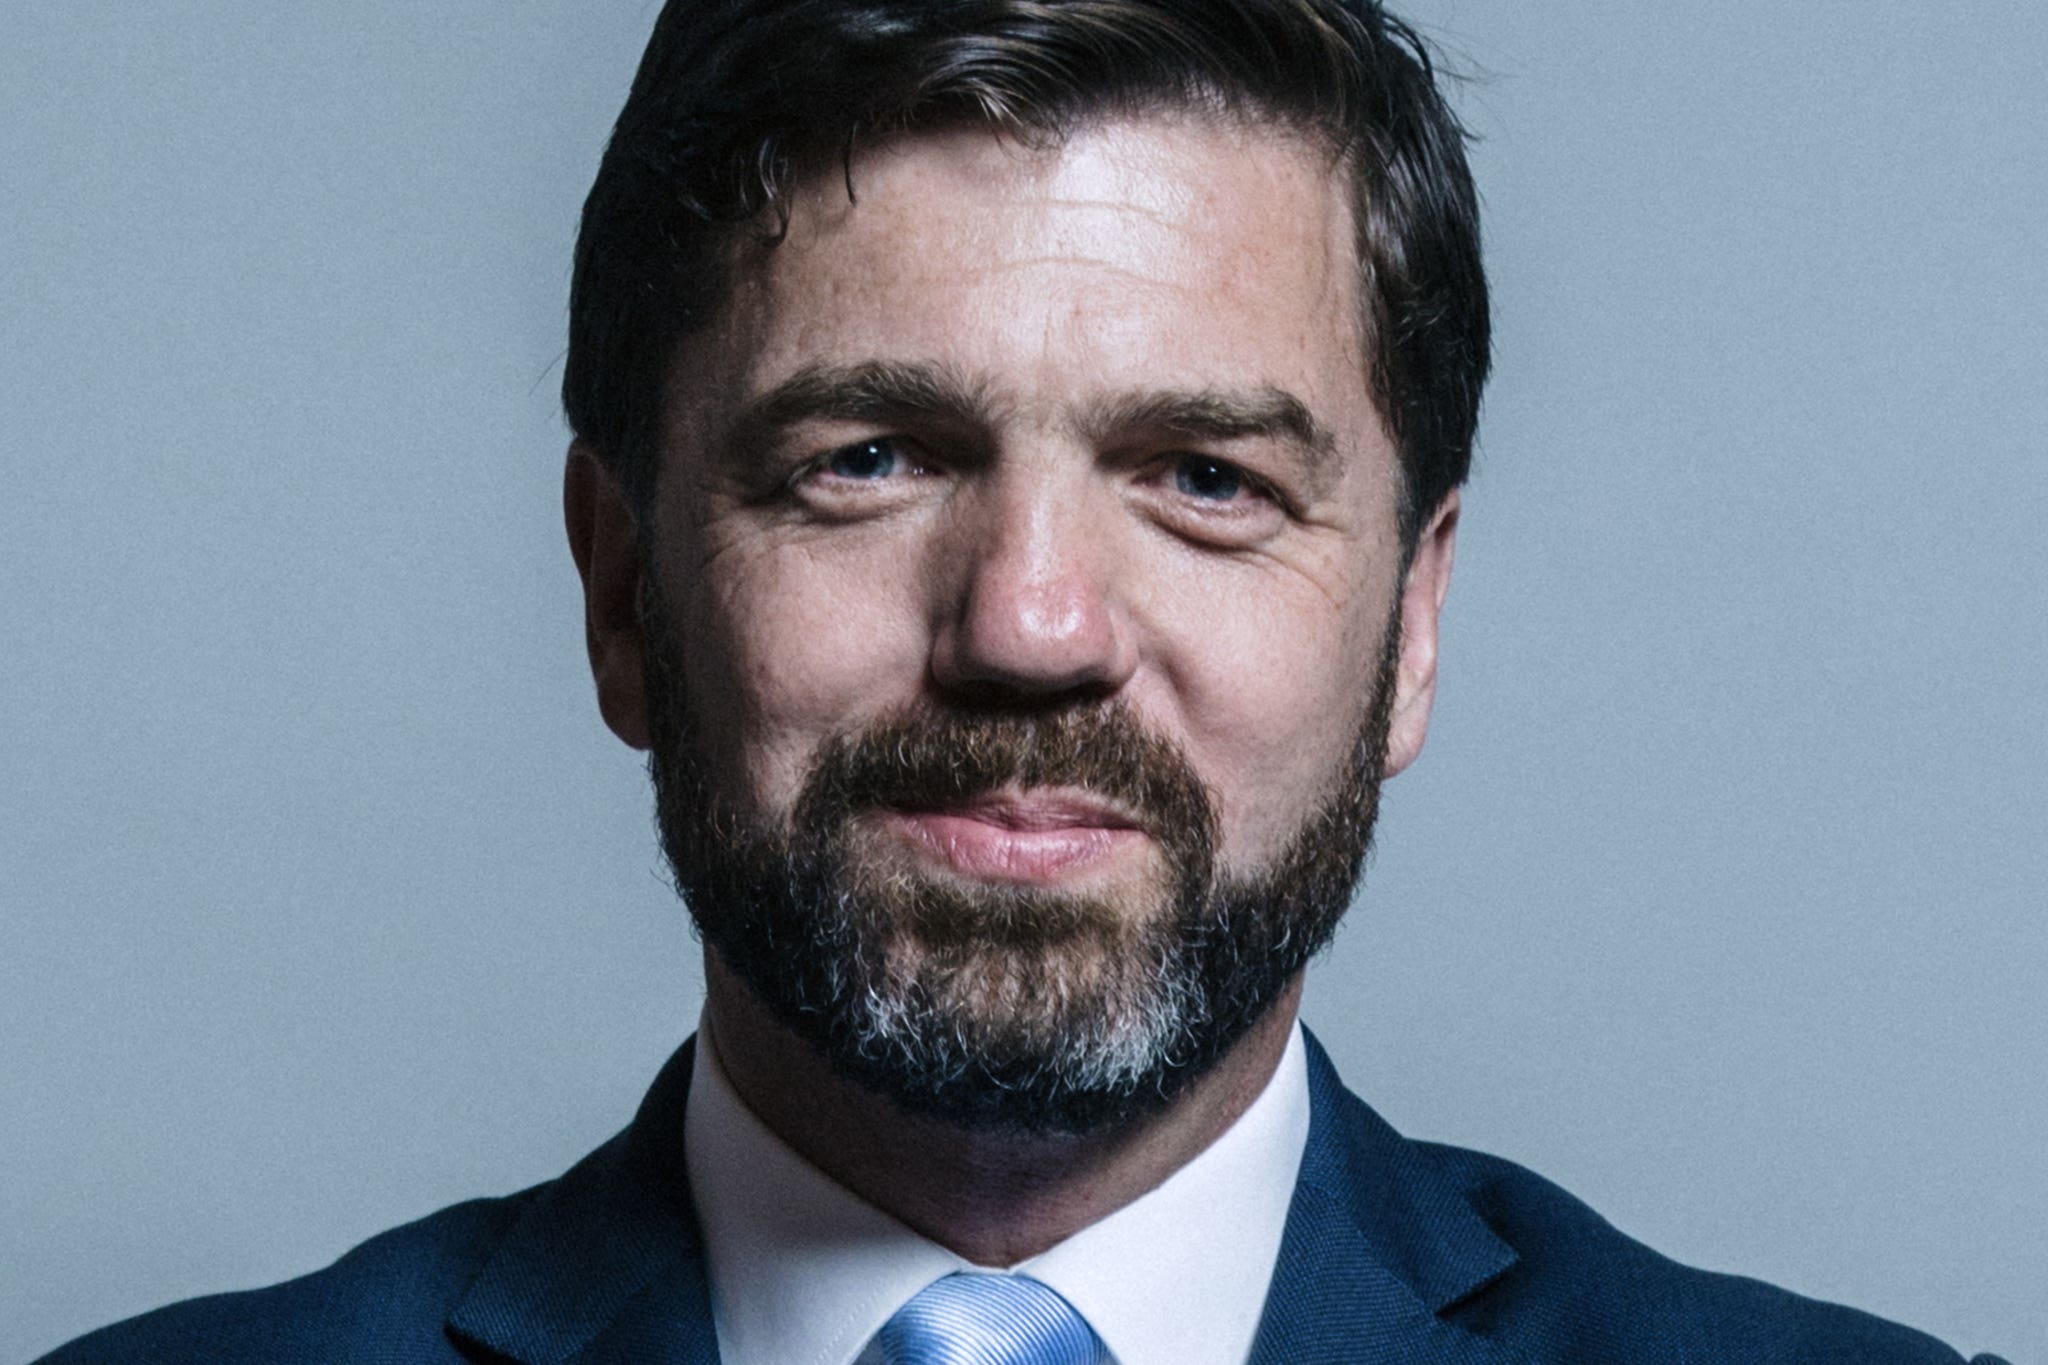 Stephen Crabb MP, chair of the war crimes APPG, said he was ‘increasingly concerned’ over the lack of action over the suspects